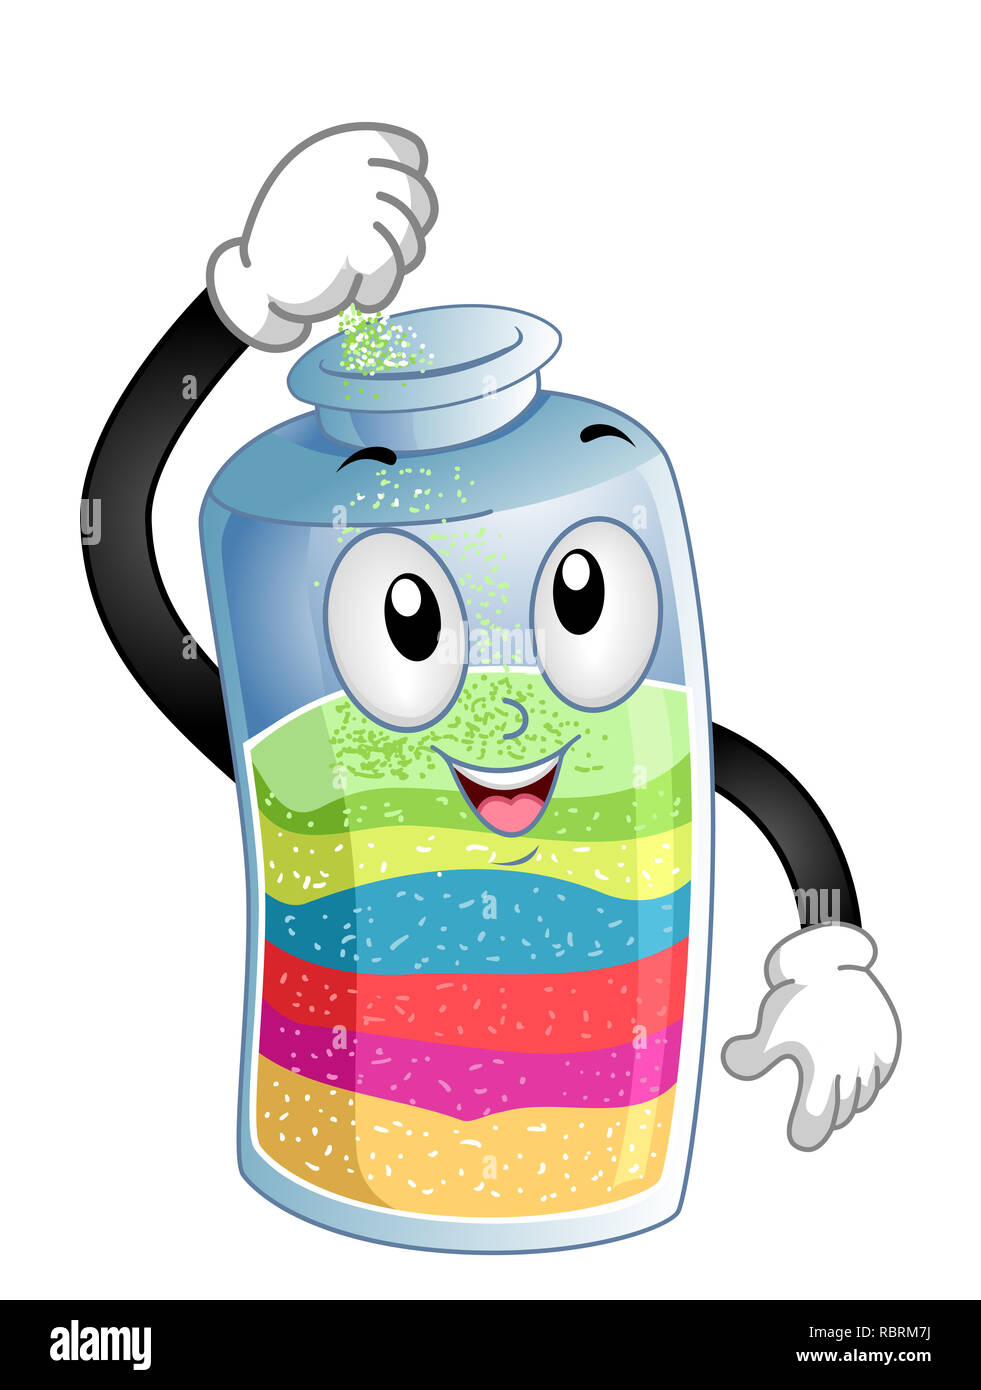 Illustration of a Sand Bottle Mascot Pouring Colored Sand Inside Stock  Photo - Alamy